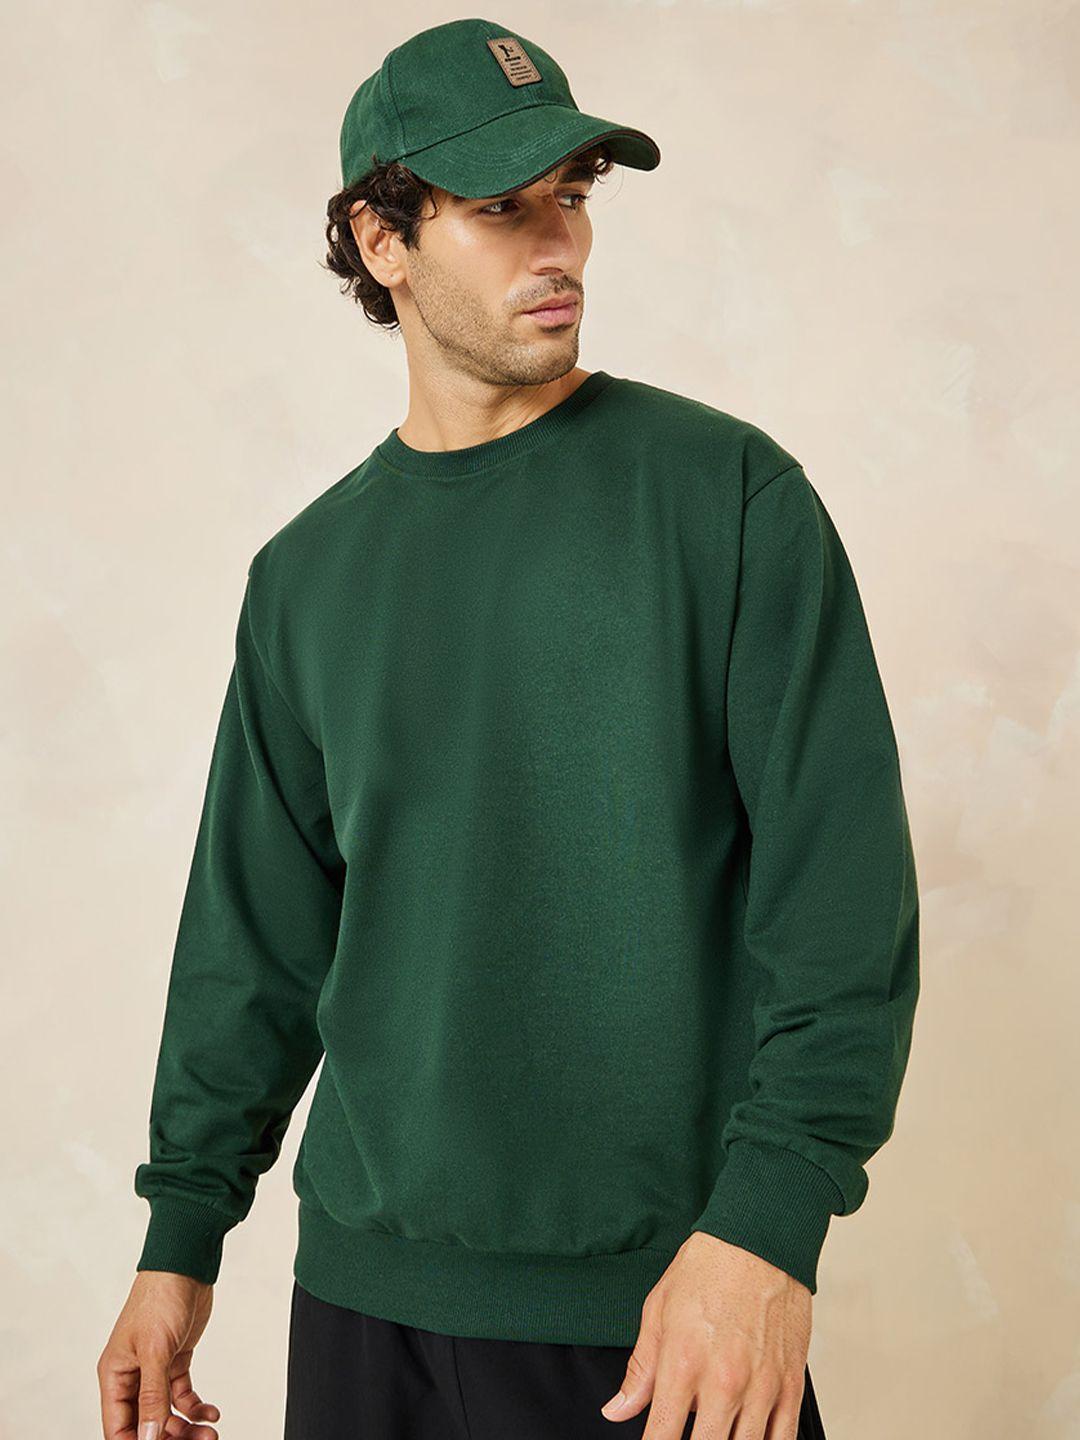 styli-relaxed-fit-cotton-terry-sweatshirt